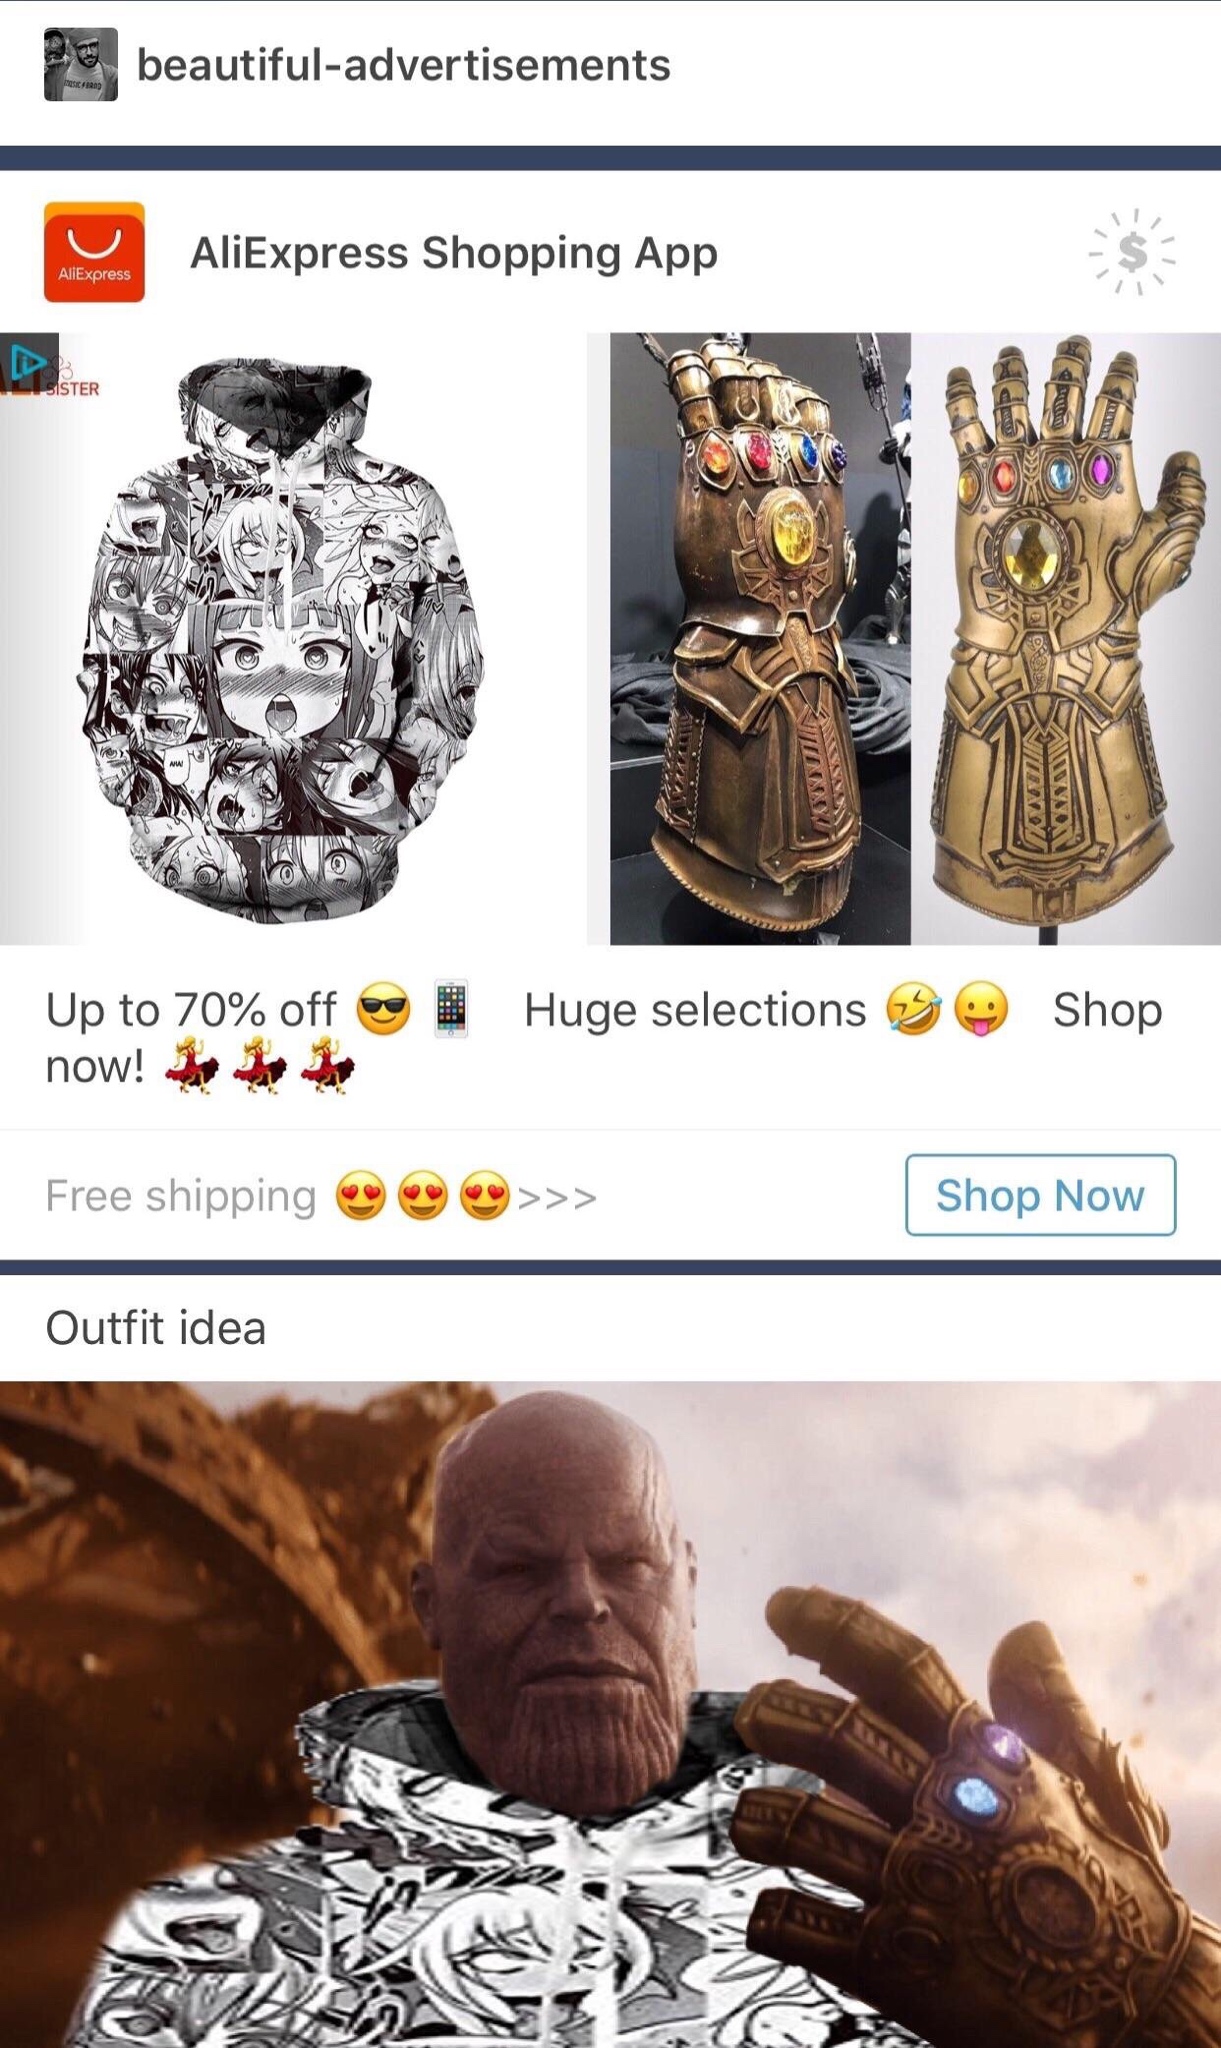 ahegao thanos - 3 beautifuladvertisements AliExpress Shopping App Up to 70% off now! Huge selections Shop Free shipping >>> Shop Now Outfit idea